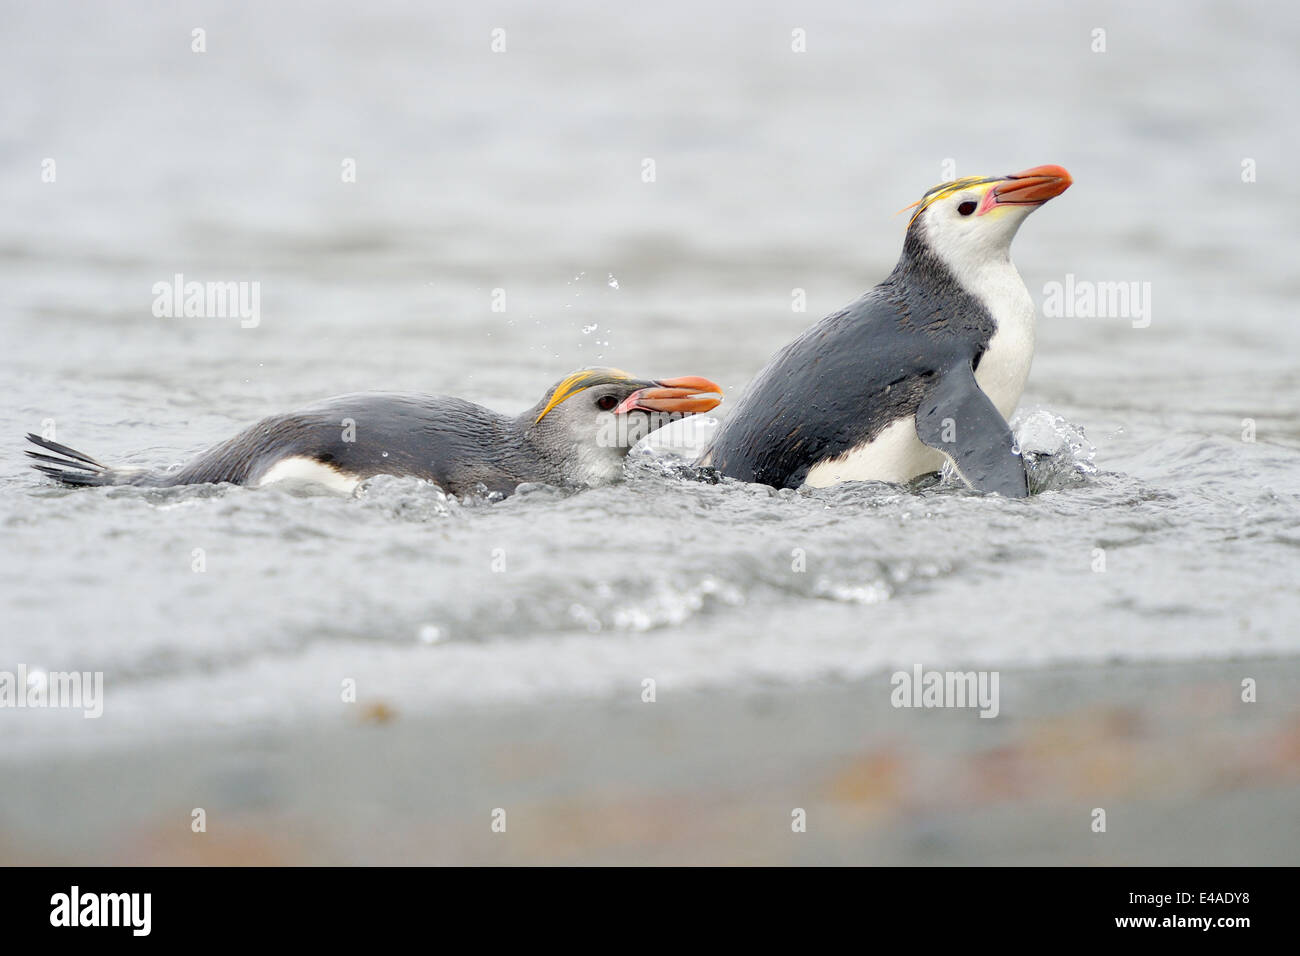 Two Royal Penguin (Eudyptes schlegeli) coming out the water on Macquarie Island, sub Antarctic waters of Australia. Stock Photo